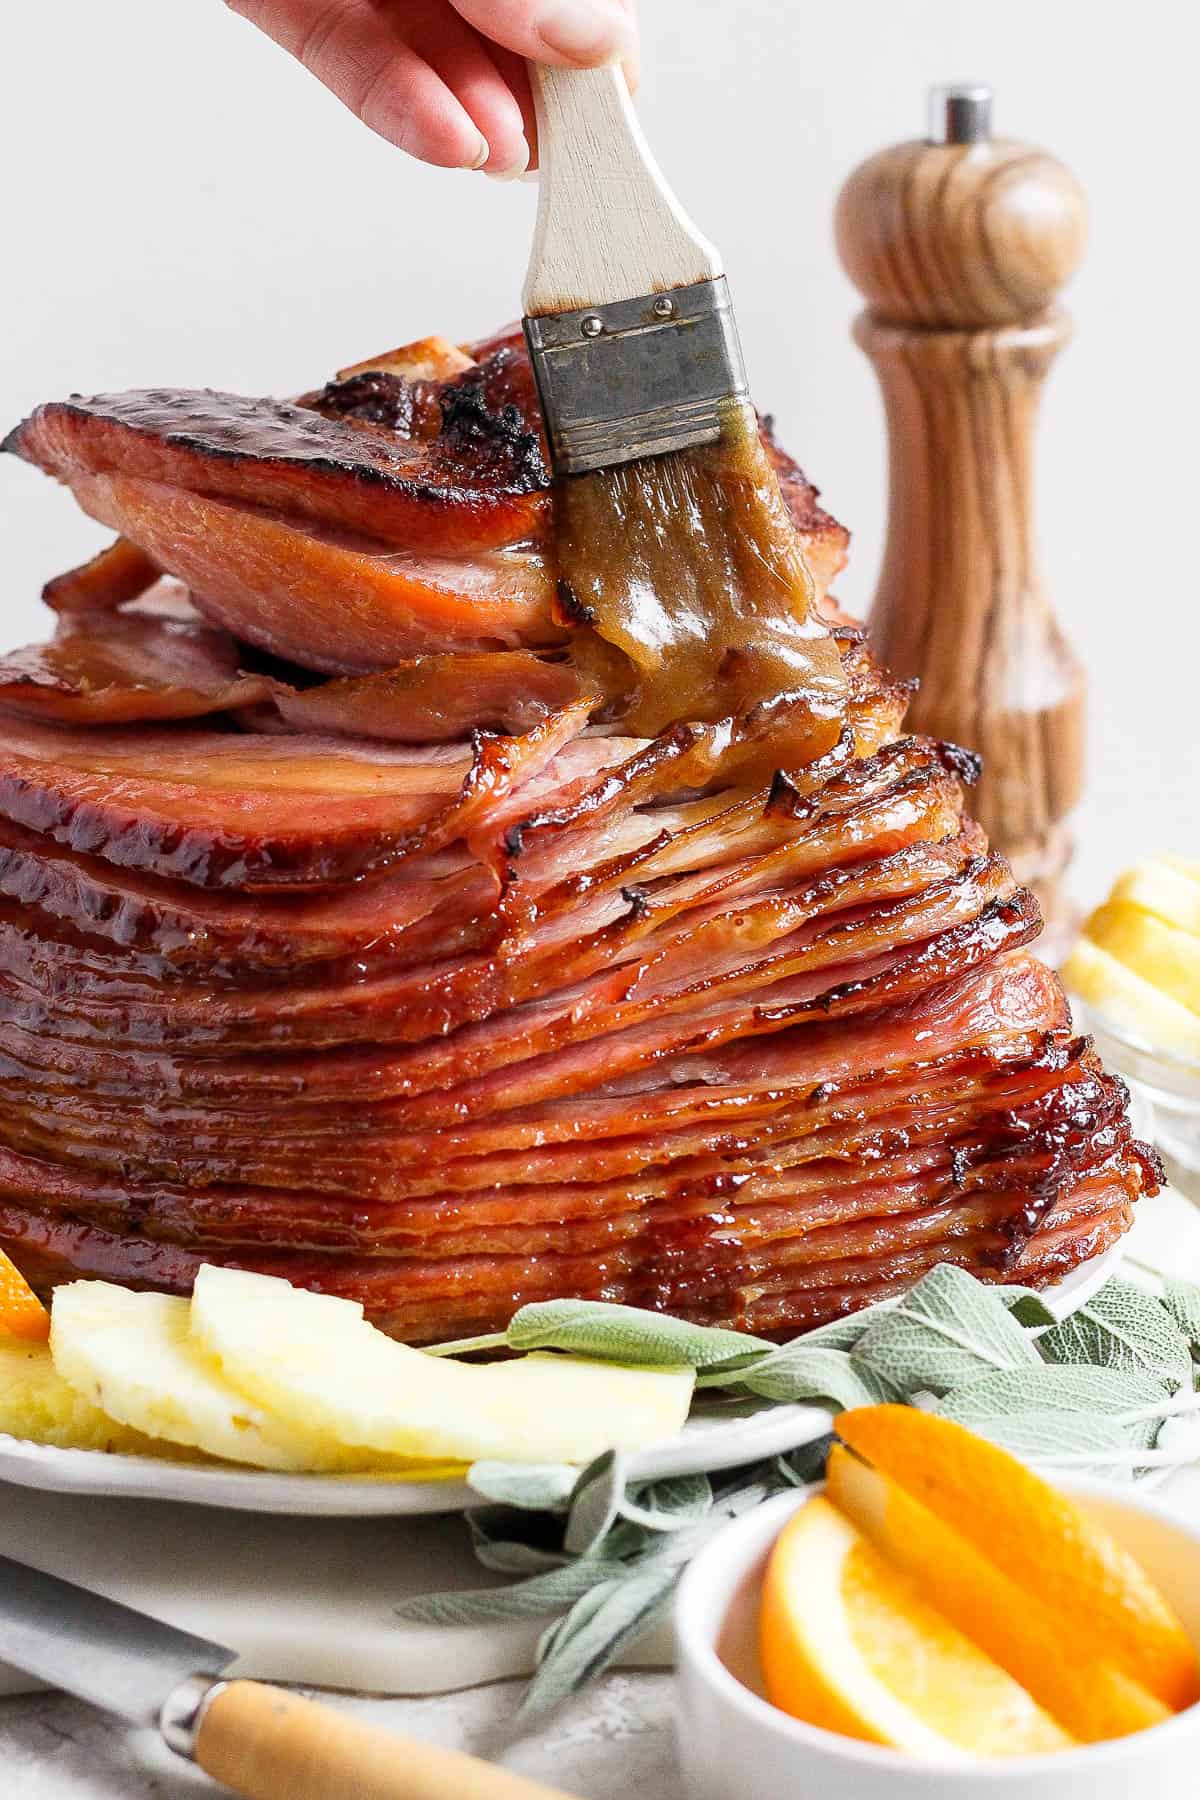 A cooked spiral ham on a plate being brushed with glaze.